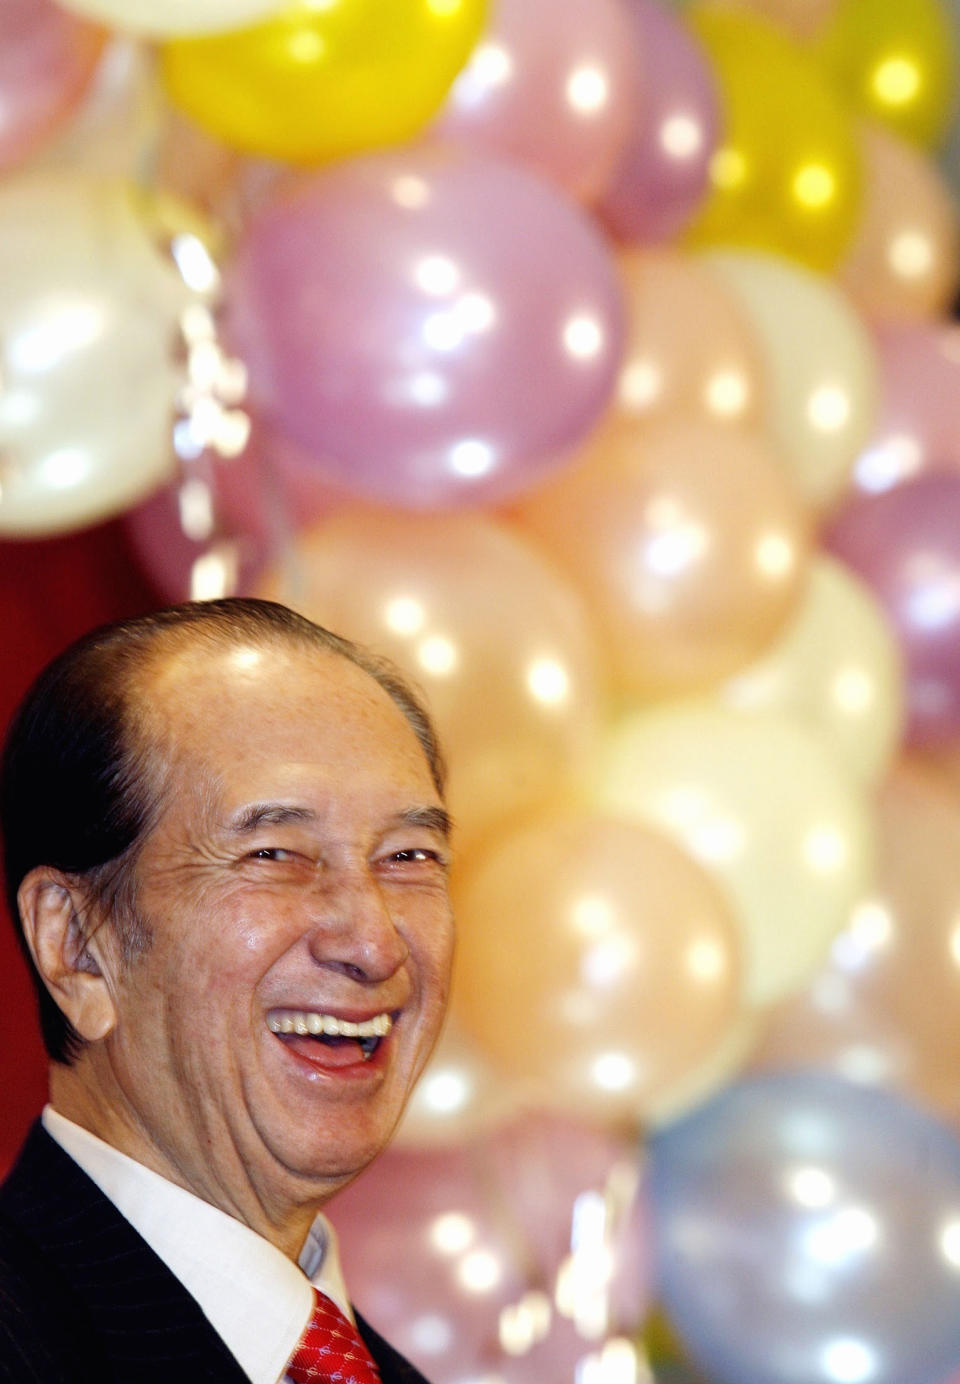 FILE - In this Nov. 20, 2006, file photo, Macau tycoon Stanley Ho smiles during a party to celebrate his 85-year-old birthday in Hong Kong. On Tuesday, May 26, 2020, the family of Stanley Ho, the Macao casino tycoon considered the father of modern gambling in China, has died at 98. (AP Photo/Vincent Yu, File)